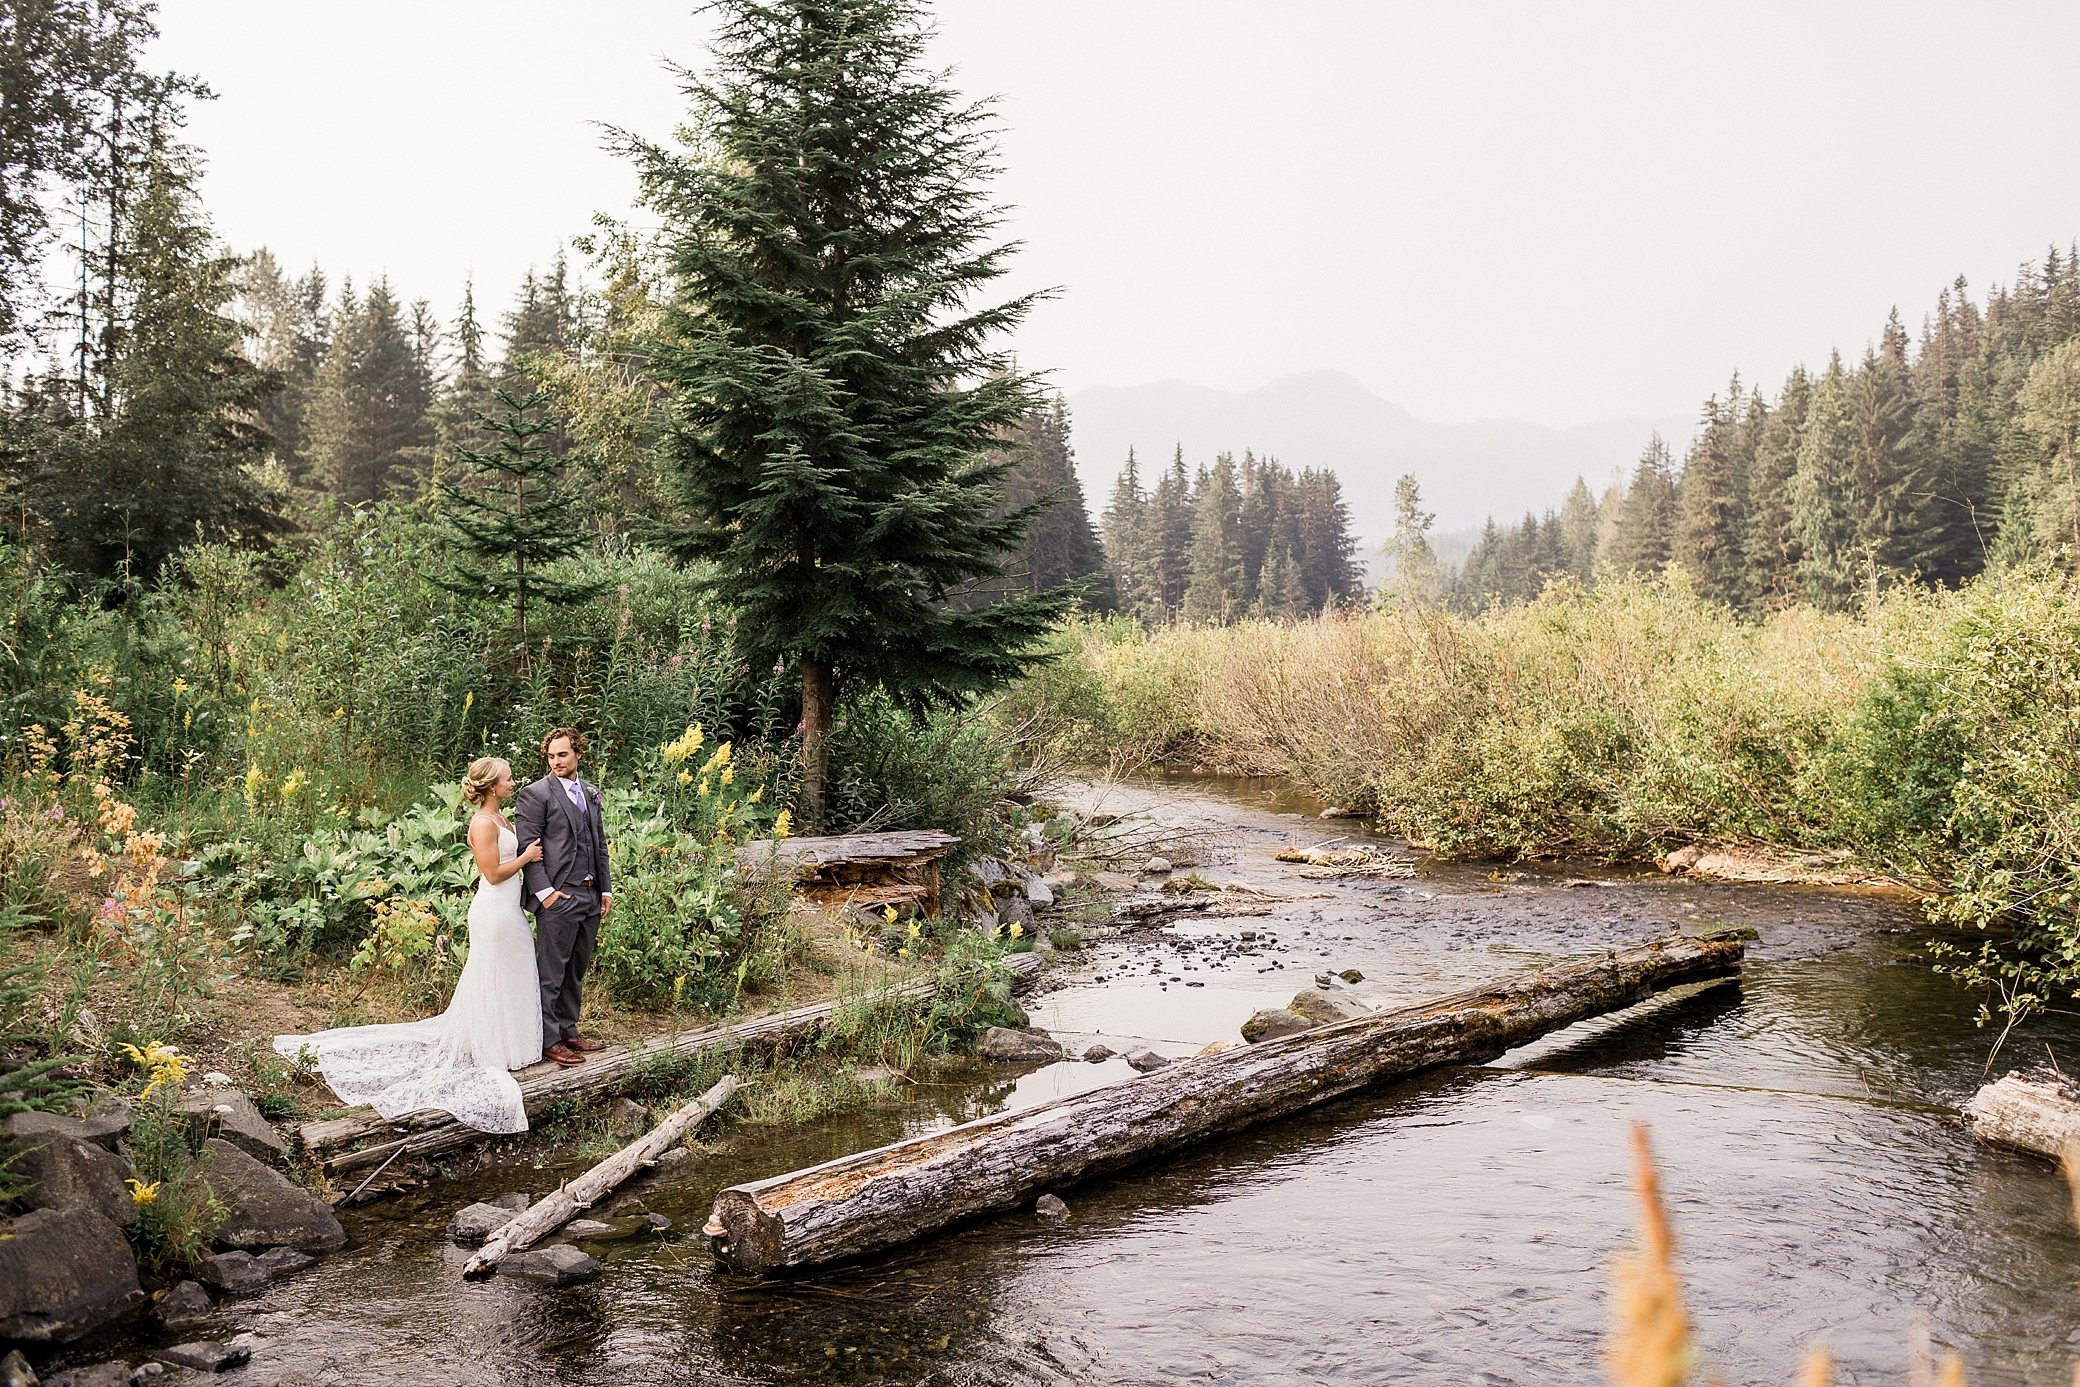 Elopement in the PNW Mountains photographed by Seattle Elopement Photographer, Megan Montalvo Photography